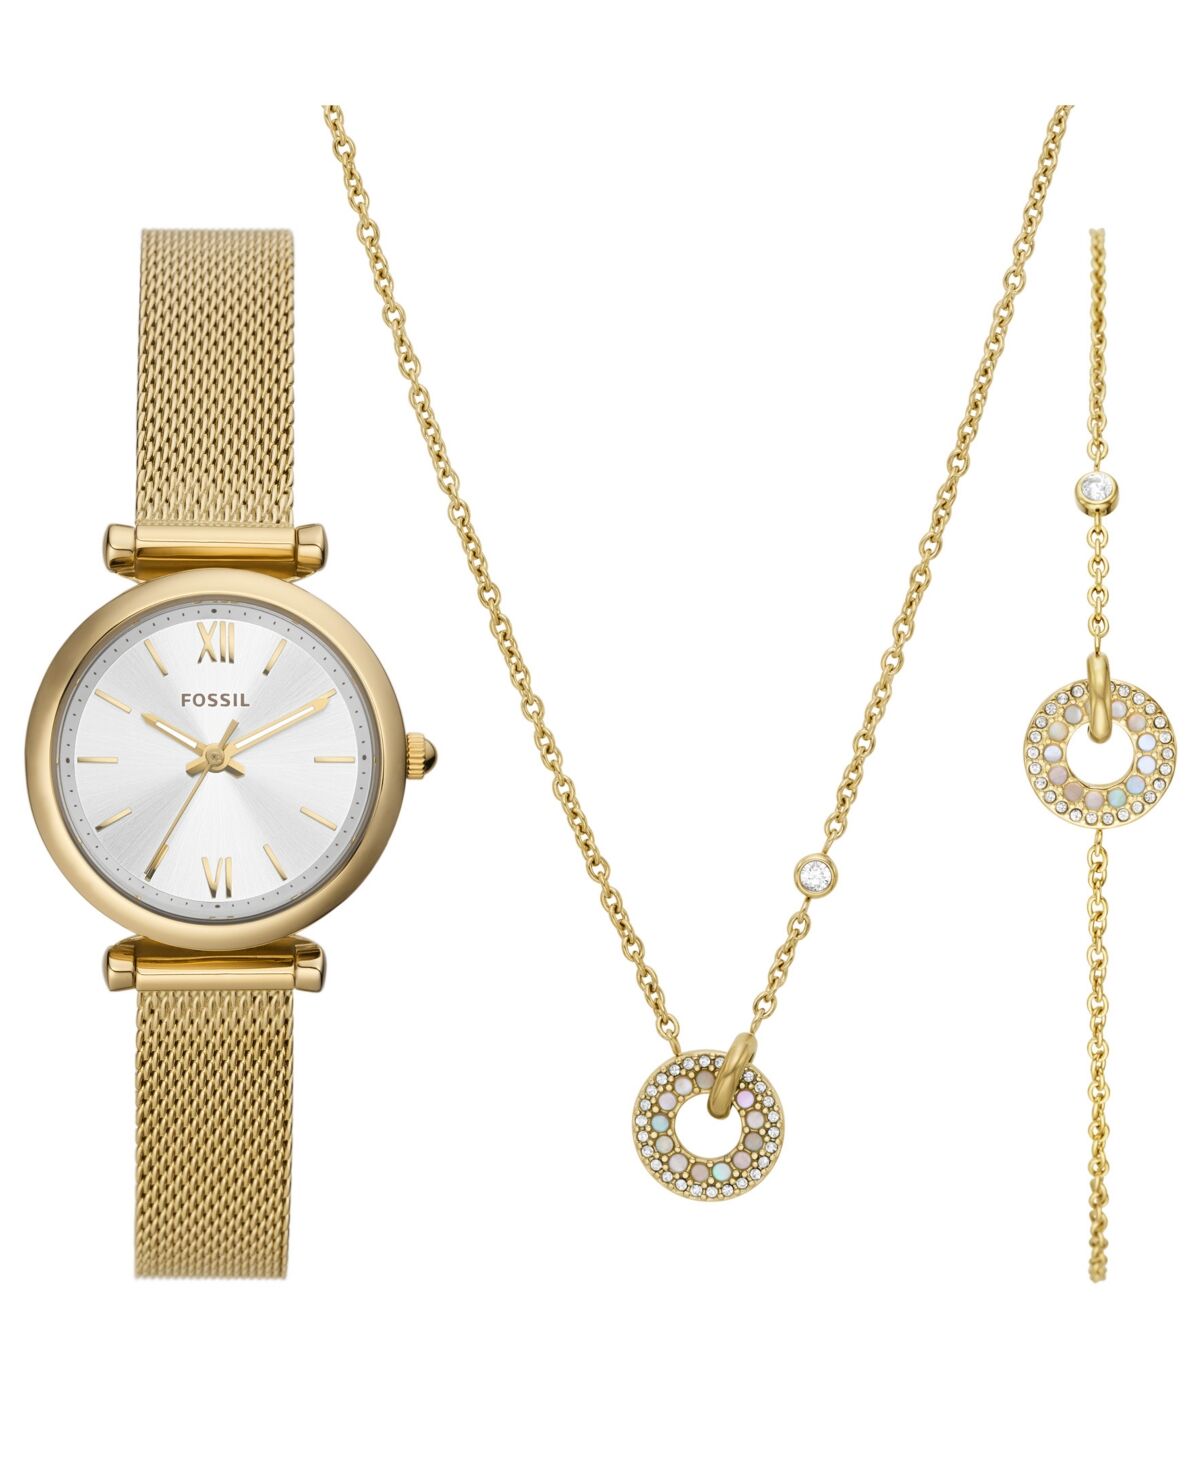 Fossil Women's Carlie Three-Hand, Gold-Tone Stainless Steel Bracelet Watch, 28mm and Jewelry Set - Gold-Tone